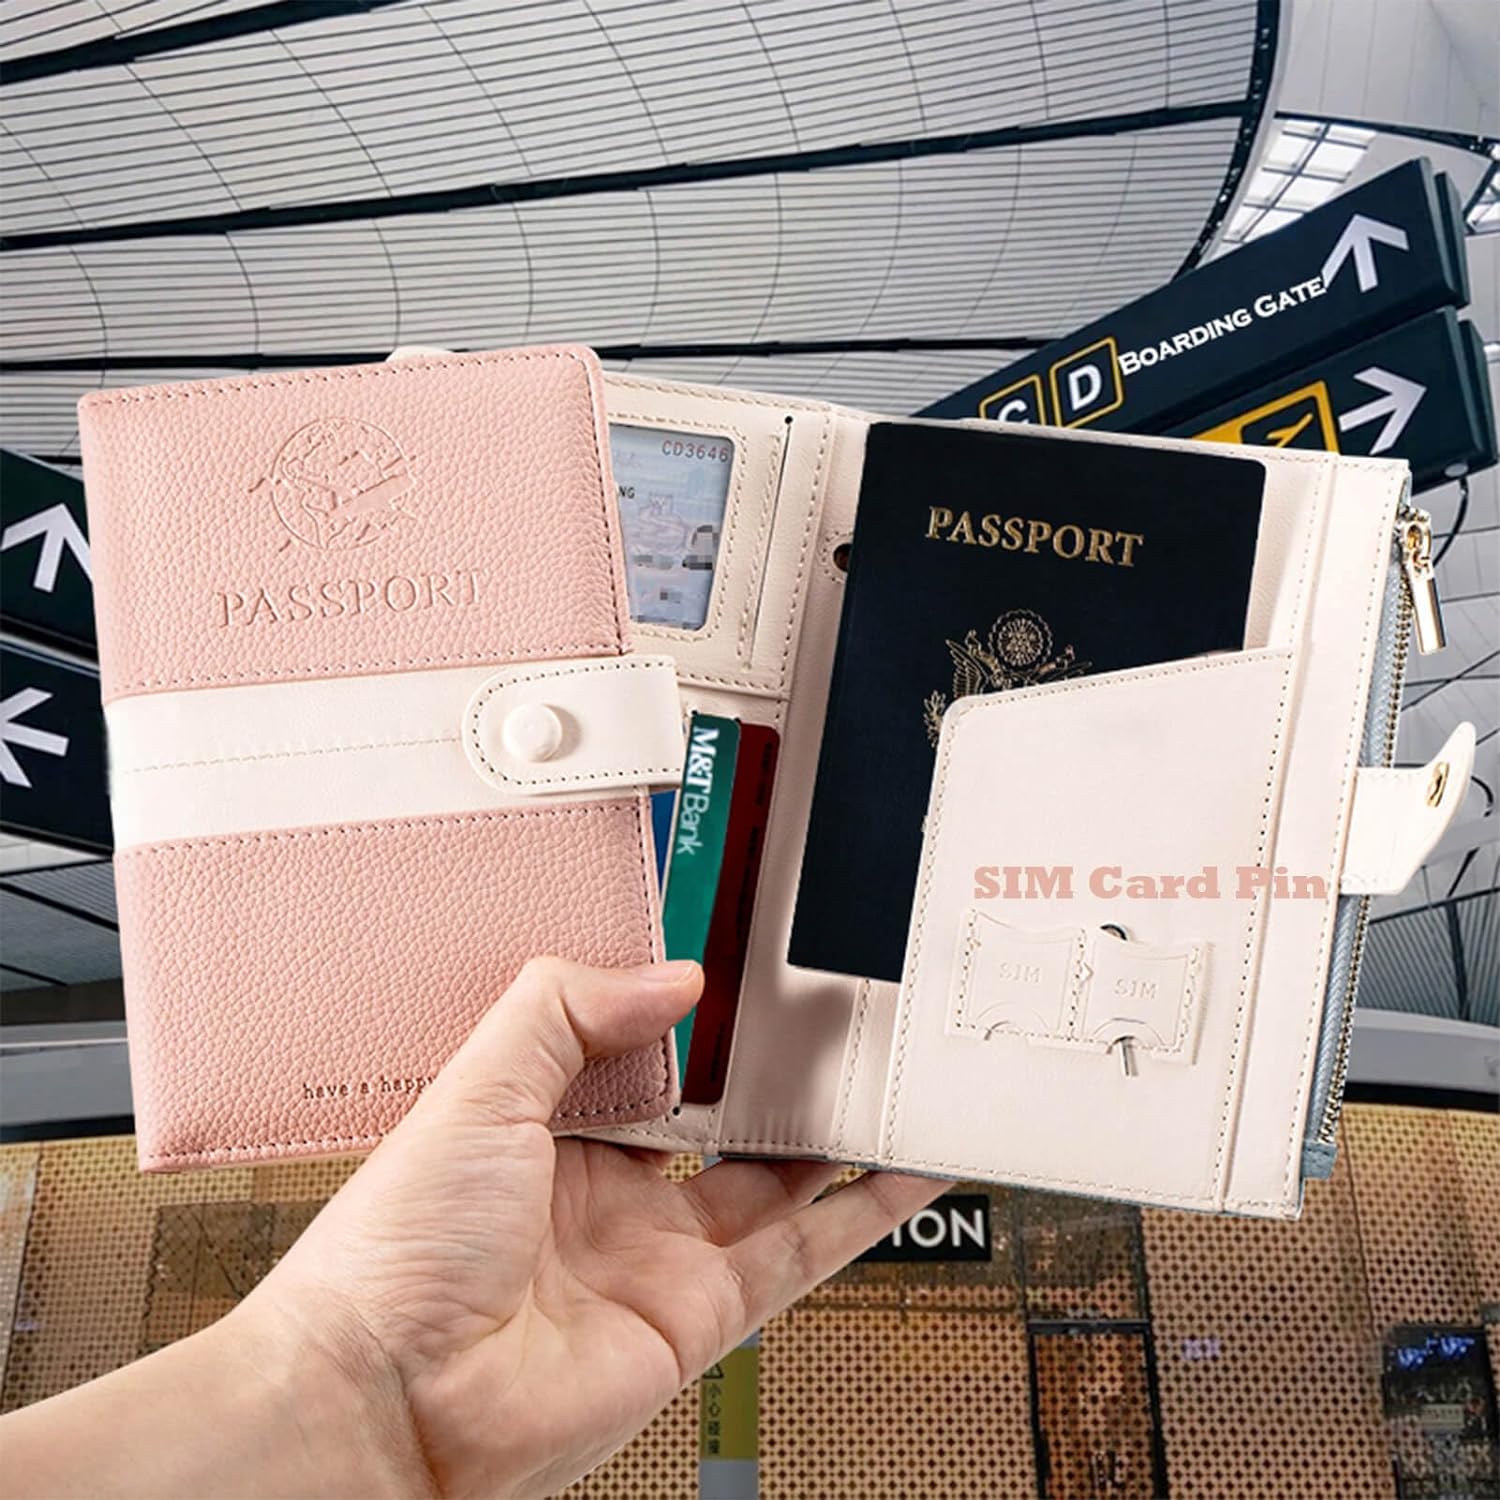 JoyChoi RFID Passport Holder with Airtag, PU Leather Passport Cover, Travel Wallet with Zipper Pocket, Pen Slot & SIM Card Ejector Tool, Essential Travel Accessories, Pink., Pink, Rfid Wallet